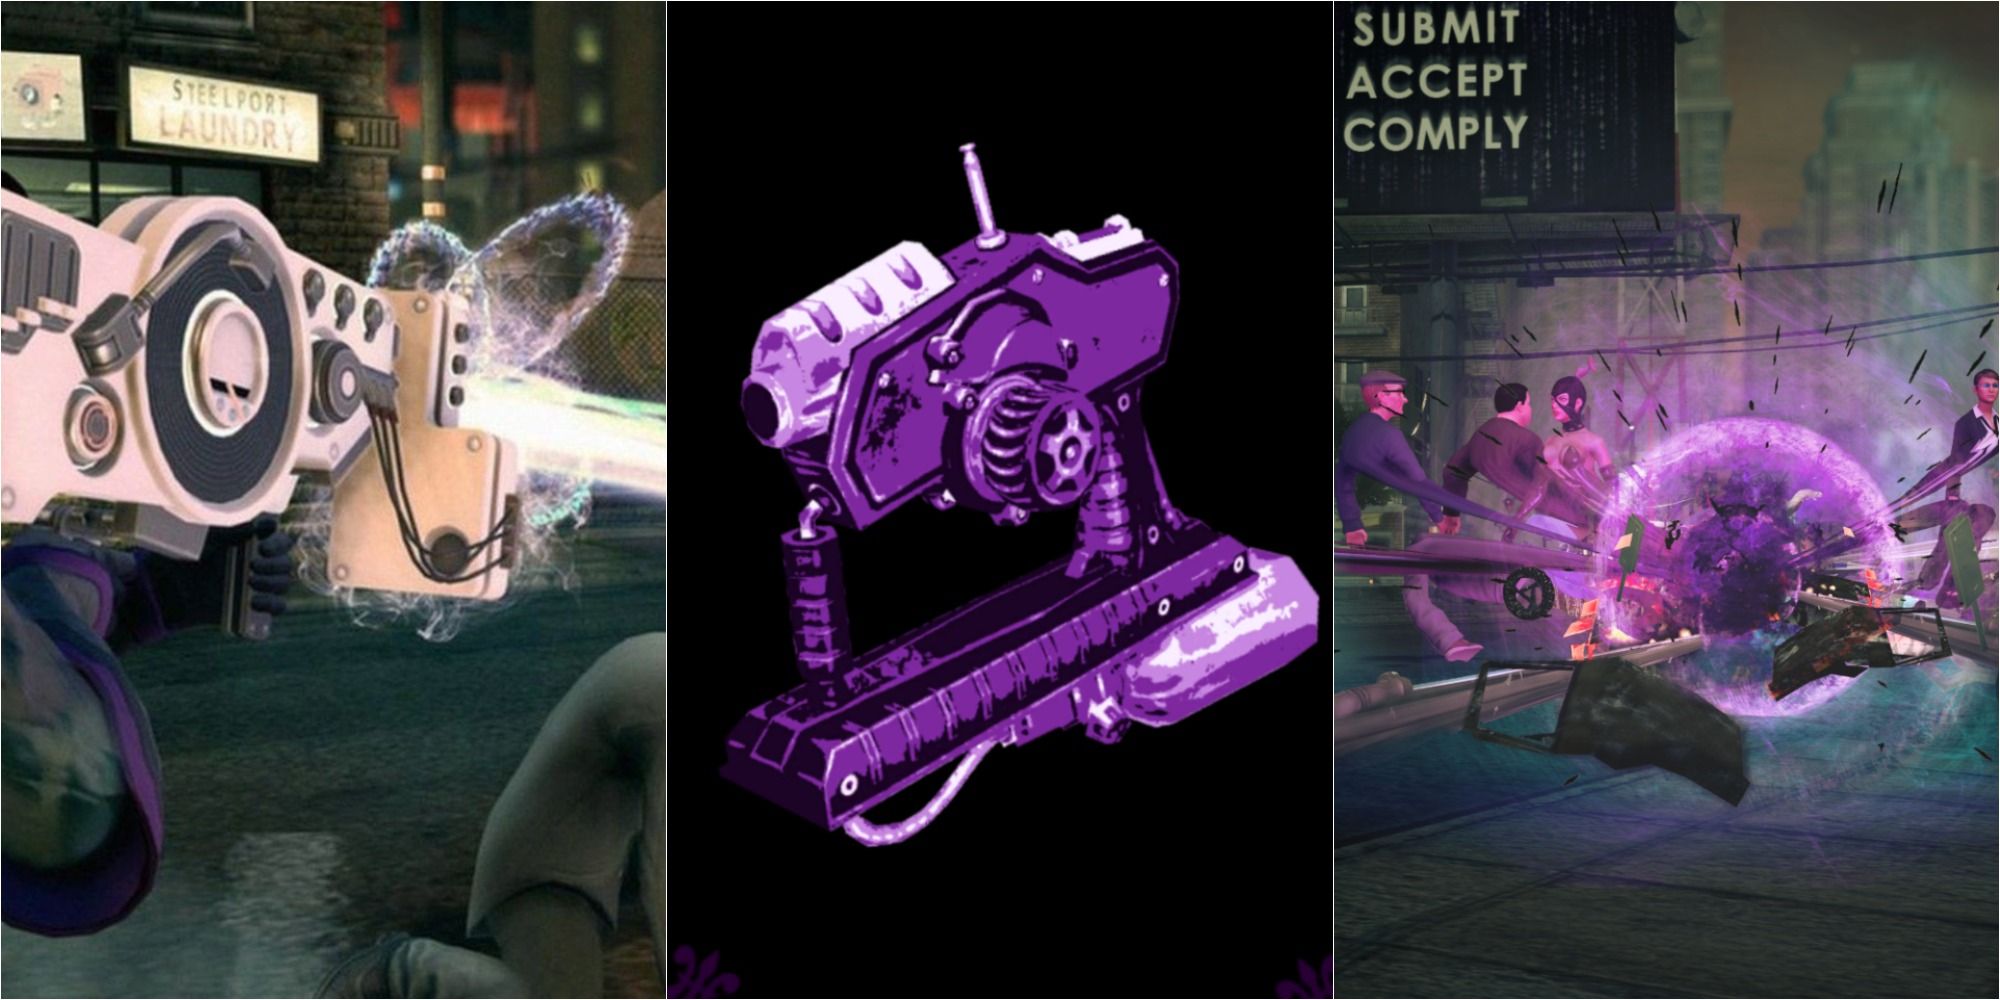 Saints Row Best Weapons Featured Split Image Of Dubstep Gun, RC Possessor, And People Getting Sucked Into Black Hole